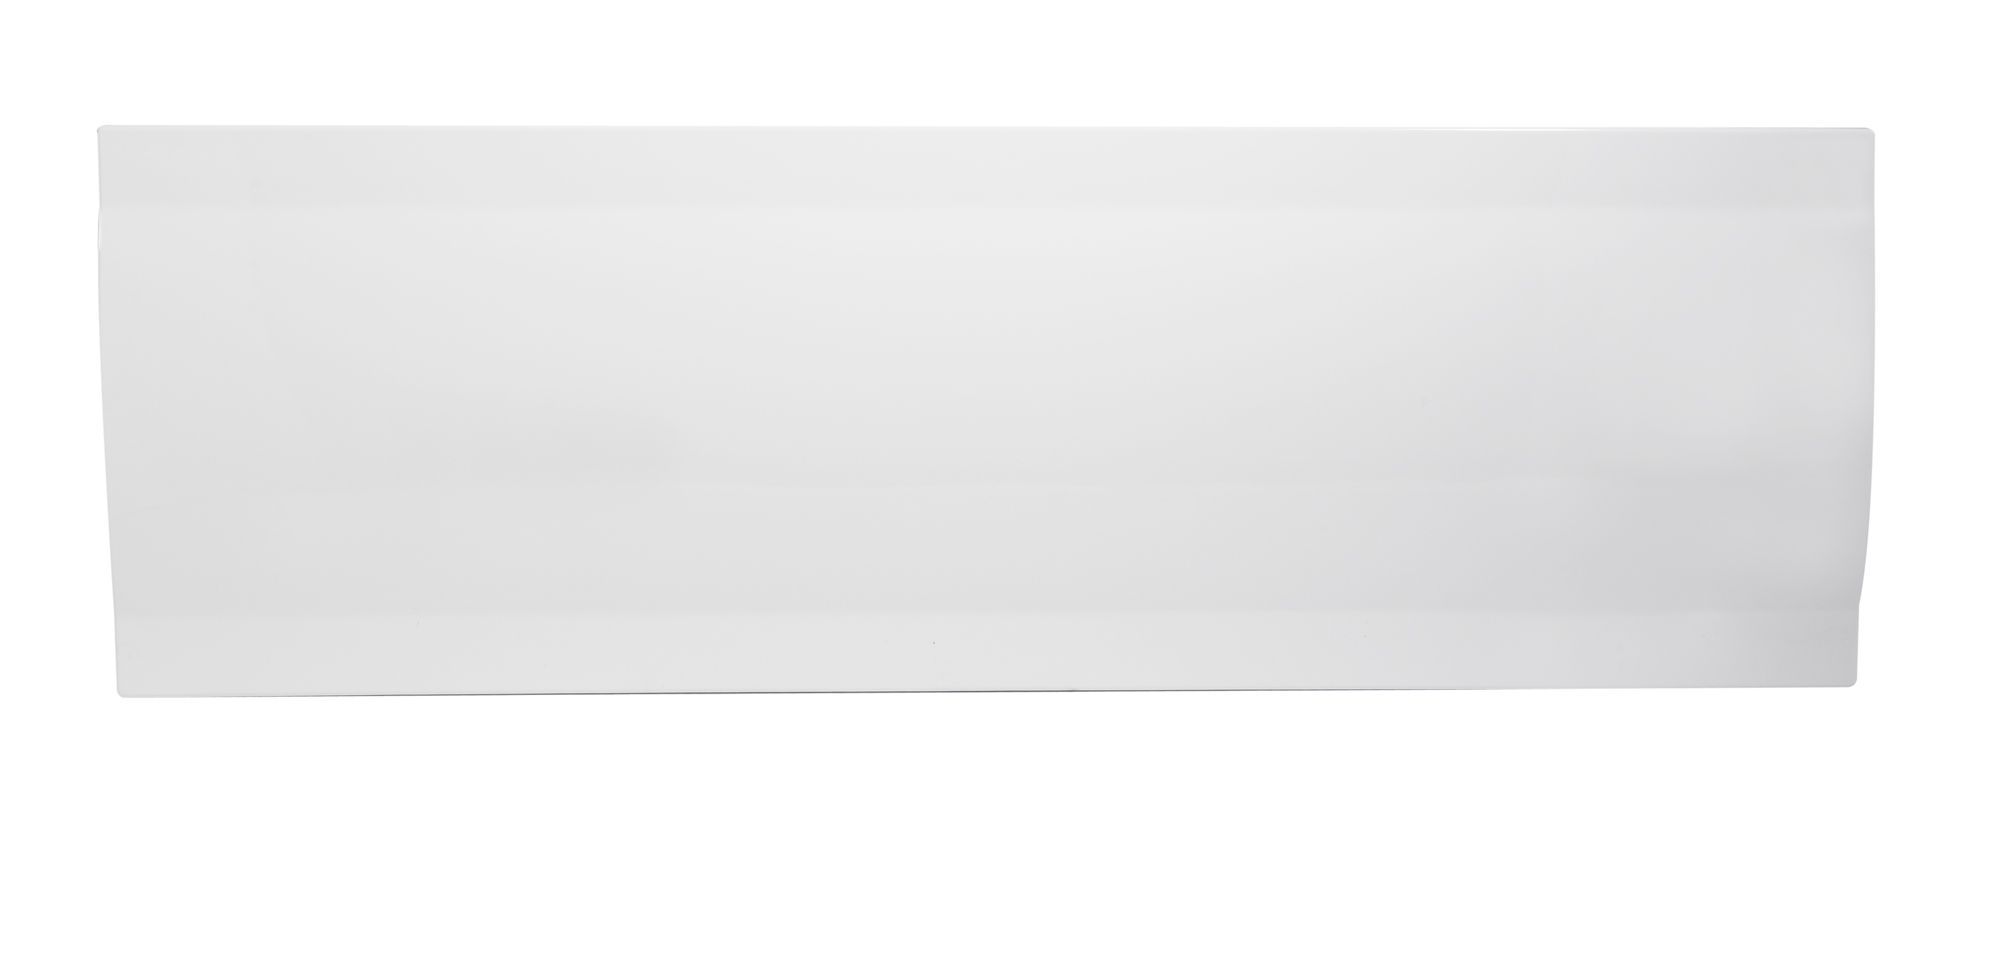 Cooke & Lewis Shaftesbury White Bath Front Panel (W)1500mm